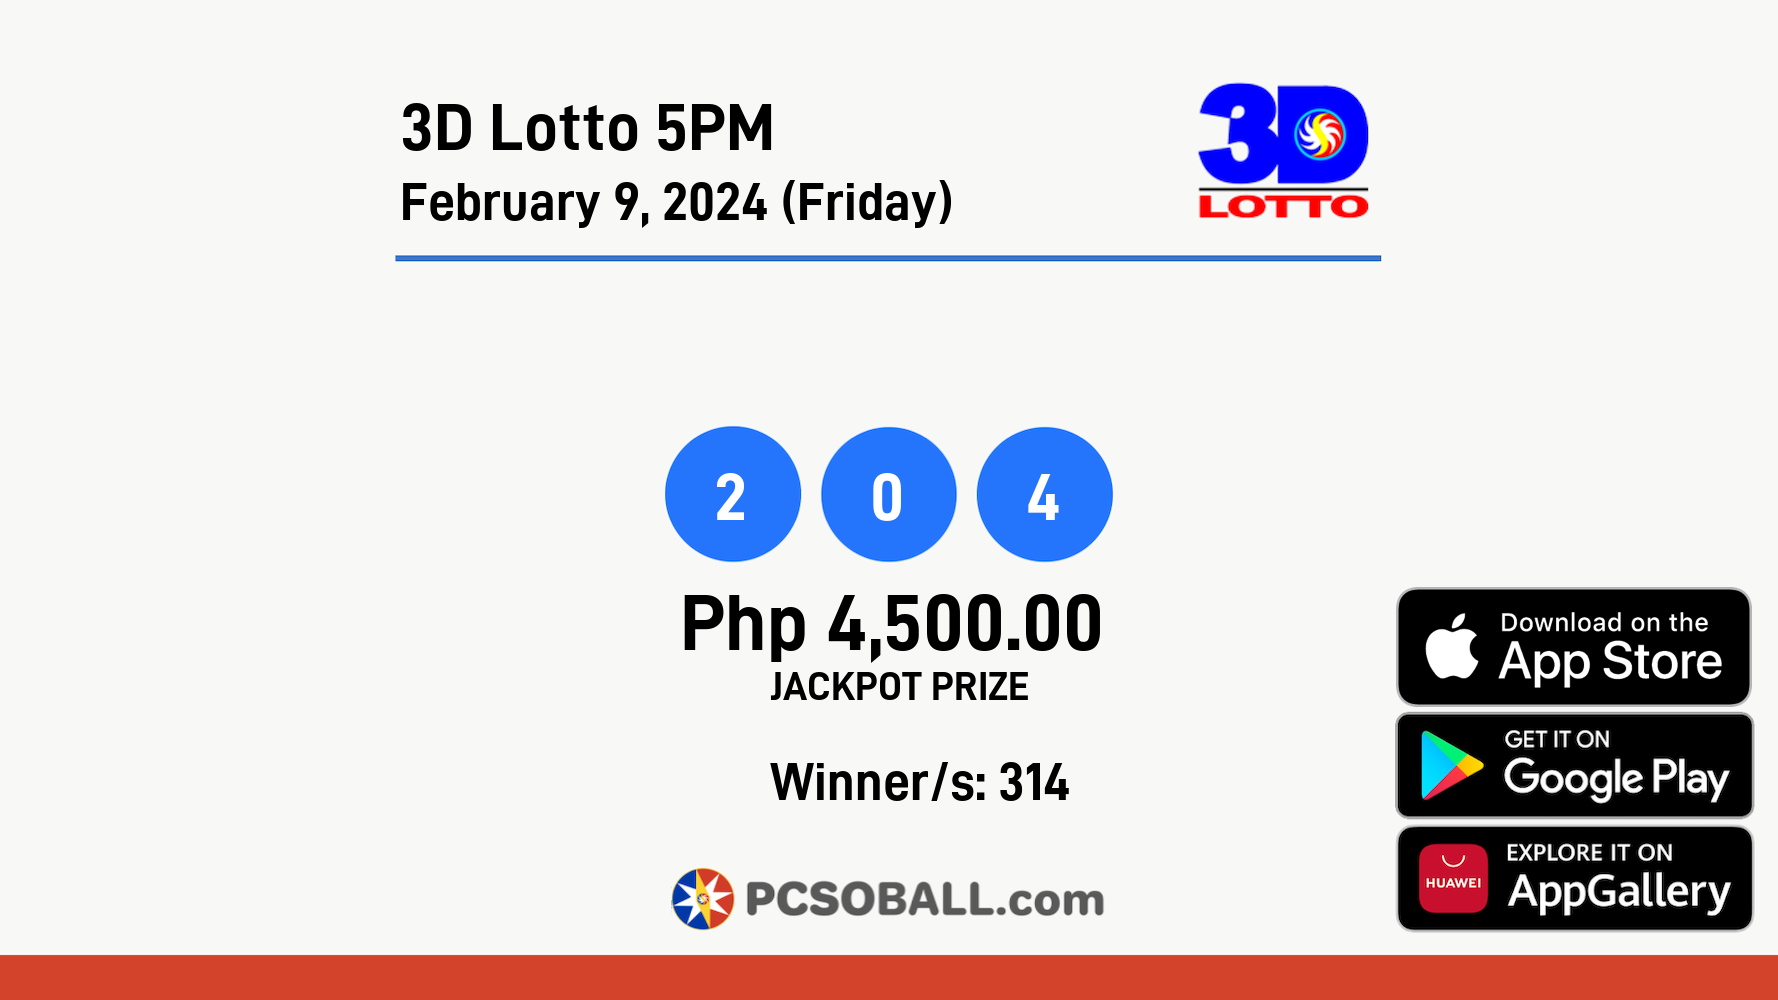 3D Lotto 5PM February 9, 2024 (Friday) Result